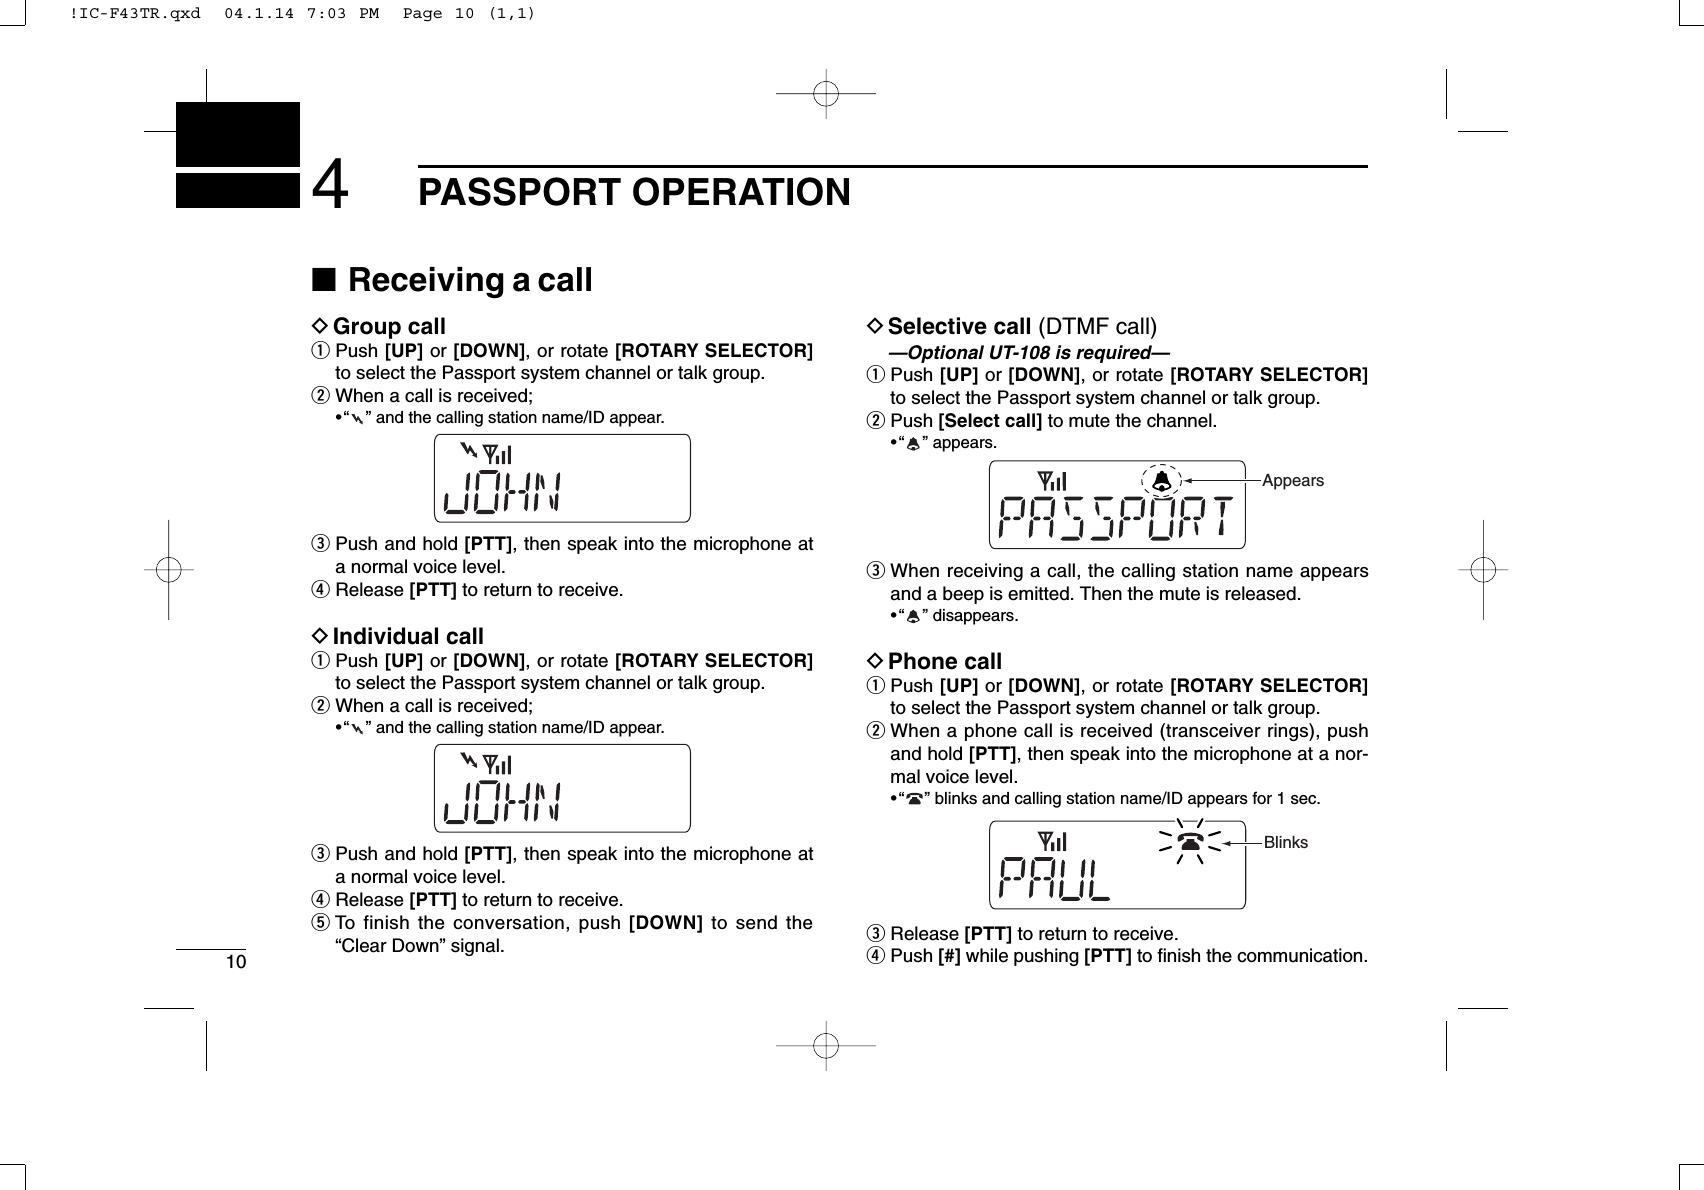 104PASSPORT OPERATION■Receiving a callDGroup callqPush [UP] or [DOWN], or rotate [ROTARY SELECTOR]to select the Passport system channel or talk group.wWhen a call is received;•“ ” and the calling station name/ID appear.ePush and hold [PTT], then speak into the microphone ata normal voice level.rRelease [PTT] to return to receive.DIndividual callqPush [UP] or [DOWN], or rotate [ROTARY SELECTOR]to select the Passport system channel or talk group.wWhen a call is received;•“ ” and the calling station name/ID appear.ePush and hold [PTT], then speak into the microphone ata normal voice level.rRelease [PTT] to return to receive.tTo finish the conversation, push [DOWN] to send the“Clear Down” signal.DSelective call (DTMF call)—Optional UT-108 is required—qPush [UP] or [DOWN], or rotate [ROTARY SELECTOR]to select the Passport system channel or talk group.wPush [Select call] to mute the channel.•“ ” appears.eWhen receiving a call, the calling station name appearsand a beep is emitted. Then the mute is released.•“ ” disappears.DPhone callqPush [UP] or [DOWN], or rotate [ROTARY SELECTOR]to select the Passport system channel or talk group.wWhen a phone call is received (transceiver rings), pushand hold [PTT], then speak into the microphone at a nor-mal voice level.•“ ” blinks and calling station name/ID appears for 1 sec.eRelease [PTT] to return to receive.rPush [#] while pushing [PTT] to ﬁnish the communication.BlinksAppears!IC-F43TR.qxd  04.1.14 7:03 PM  Page 10 (1,1)